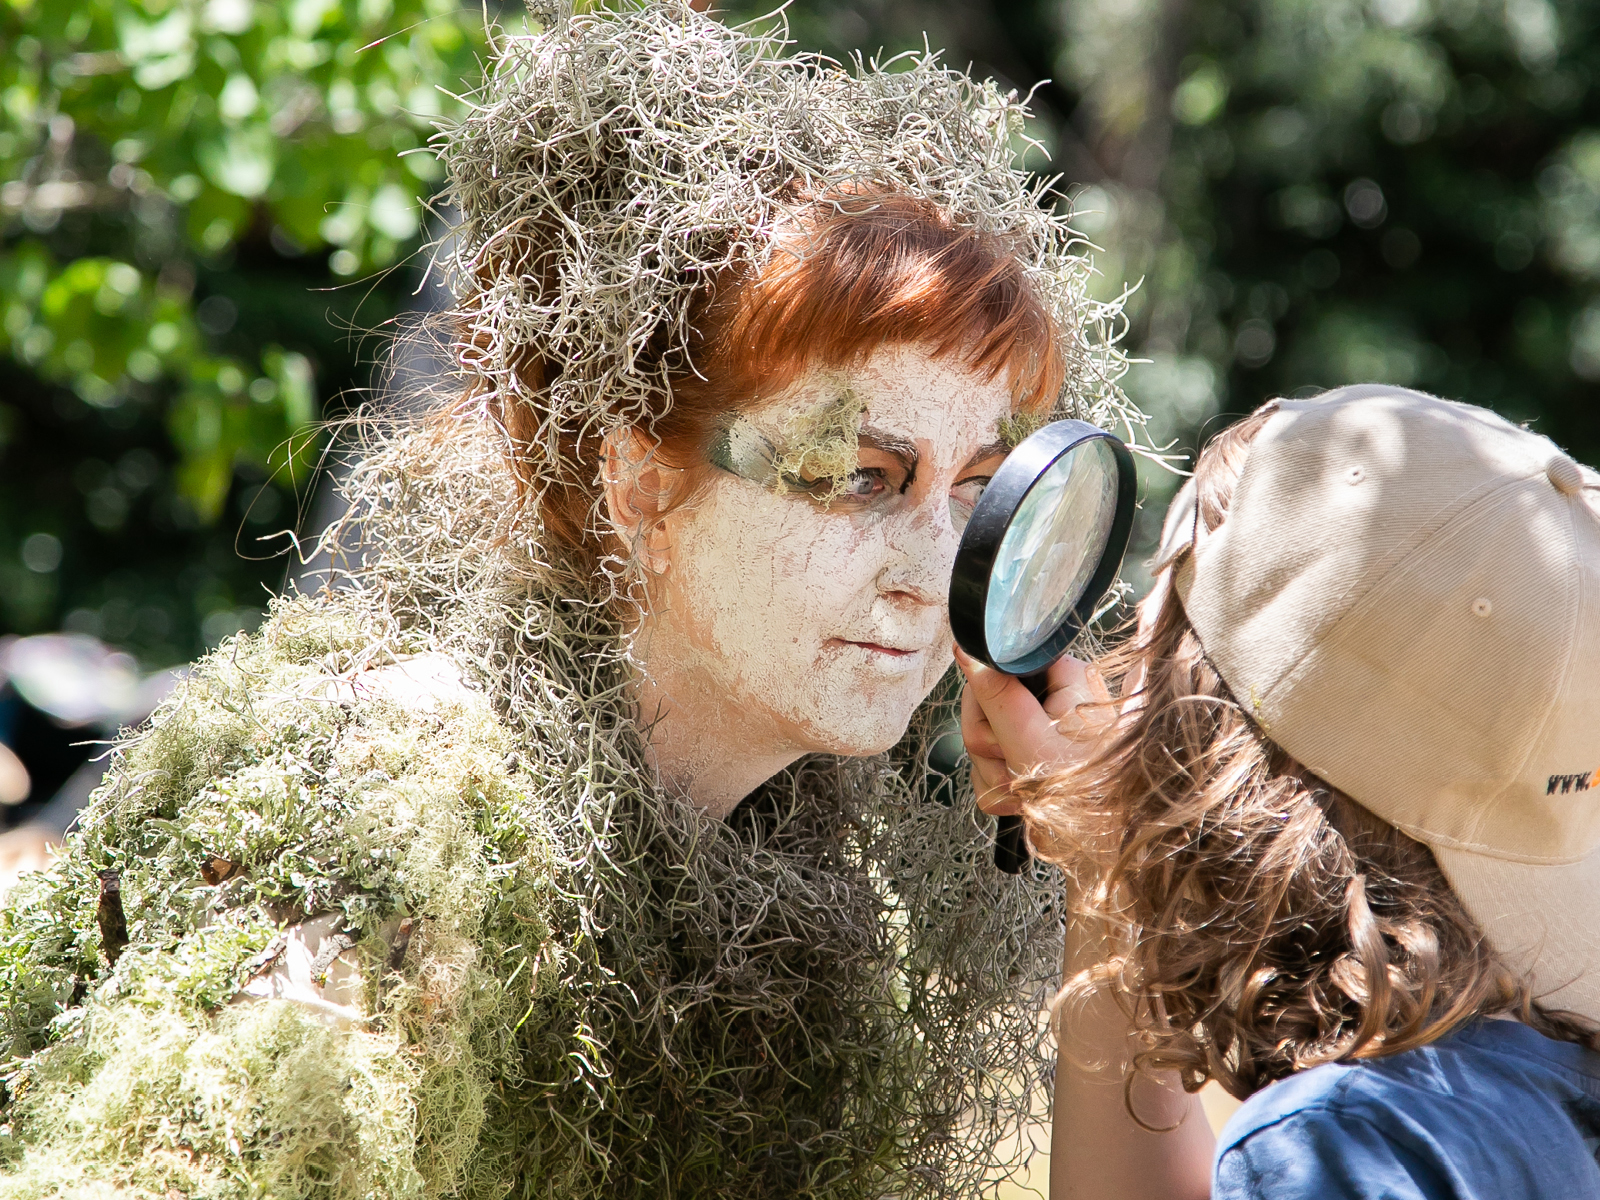 A Woman in a costume made of moss stares at a child through a magnifying glass.